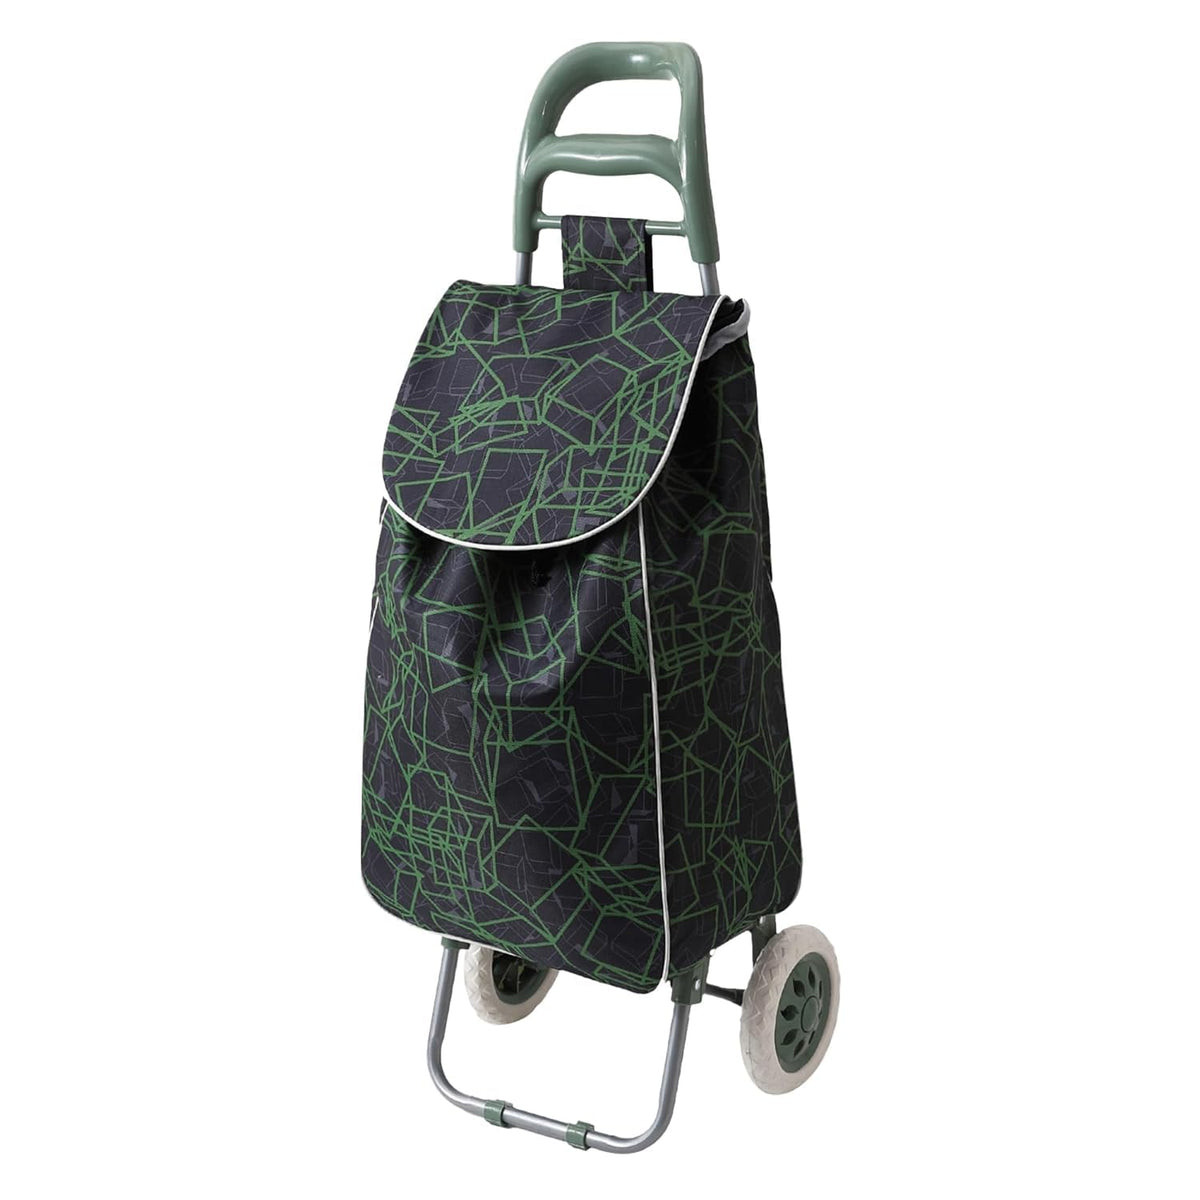 Cheston Shopping Bag for Grocery | Foldable Shopping Trolly Bag with Wheels | Large and Lightweight Shopping Trolly Bag with 30 Kg Capacity | Water-Proof Oxford Fabric with Multiple Pockets (Green)